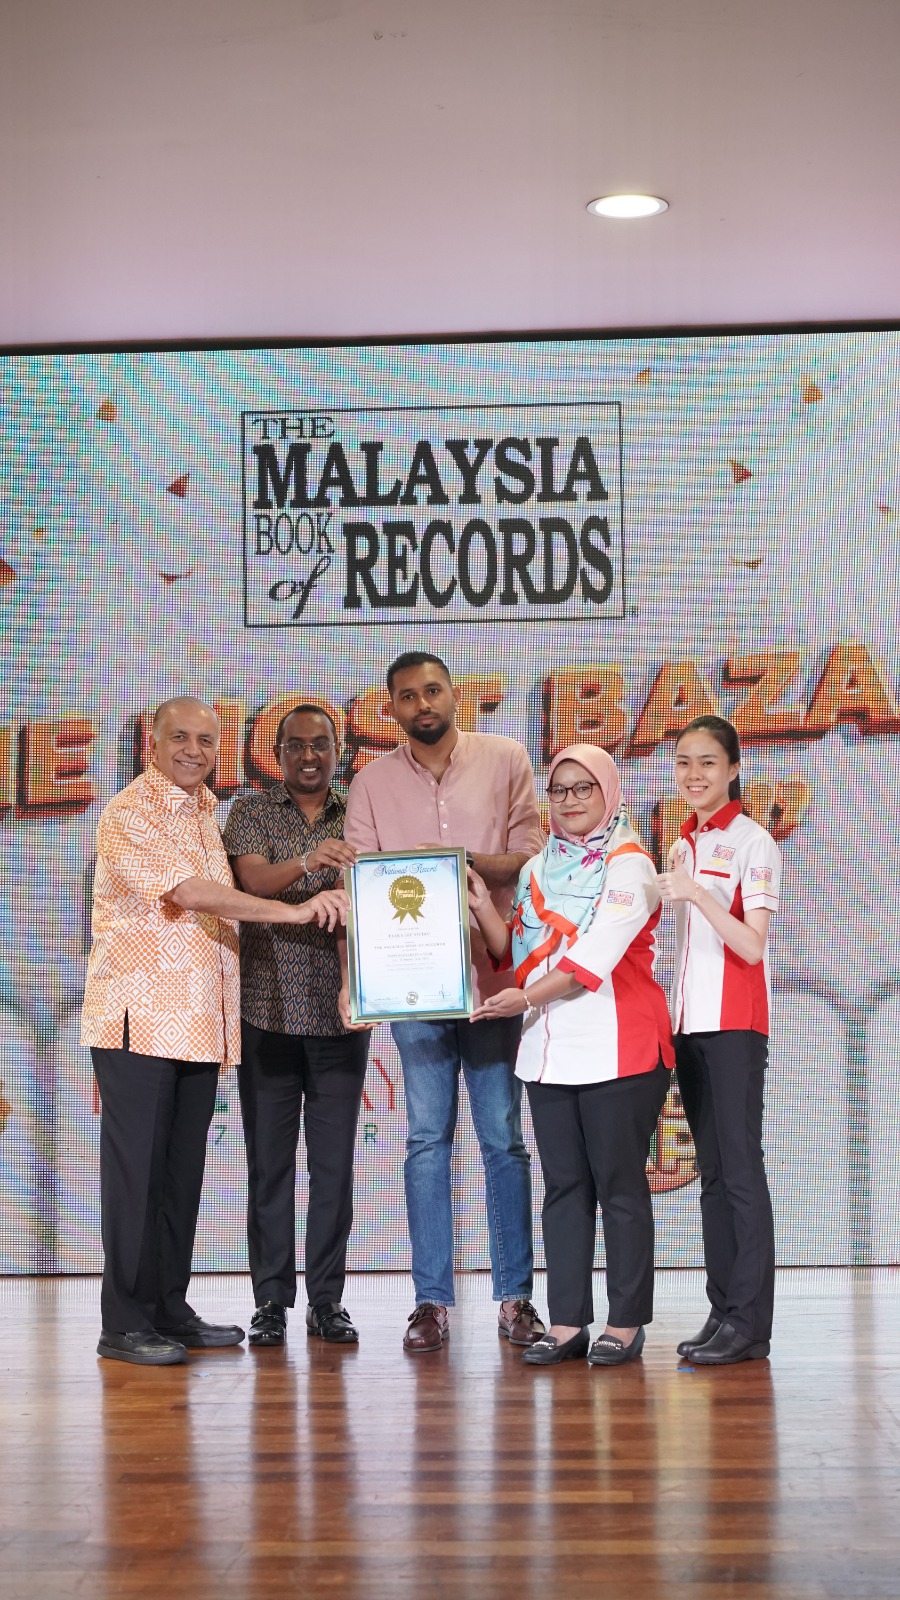 Mydin at malaysia book of record